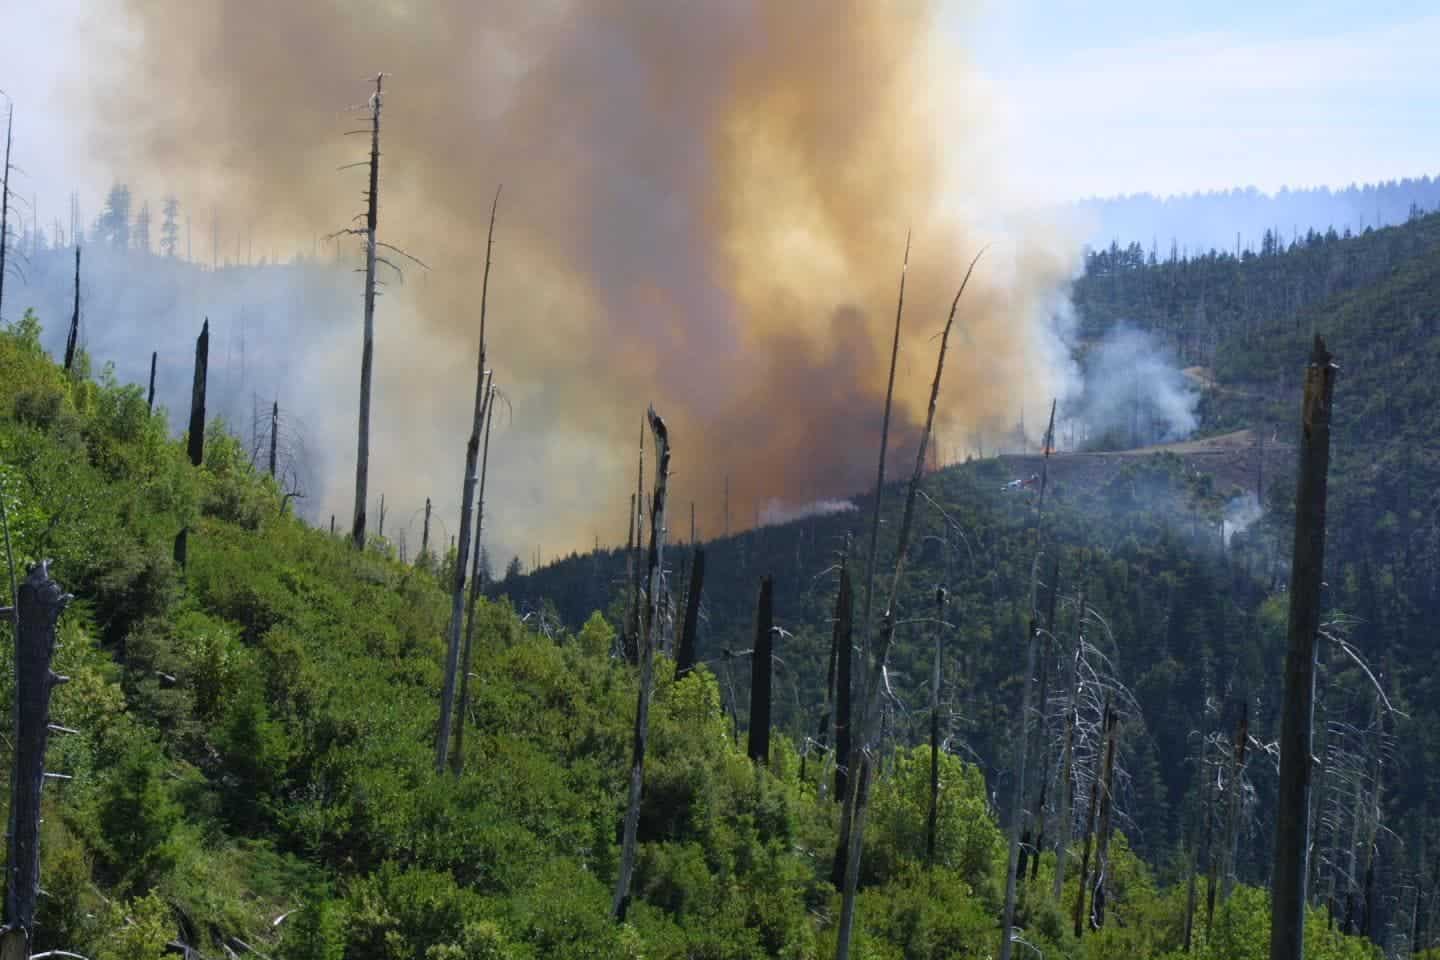 The 2002 Biscuit Fire reburns the area of the 1987 Silver fire. Credit: Thomas Link.